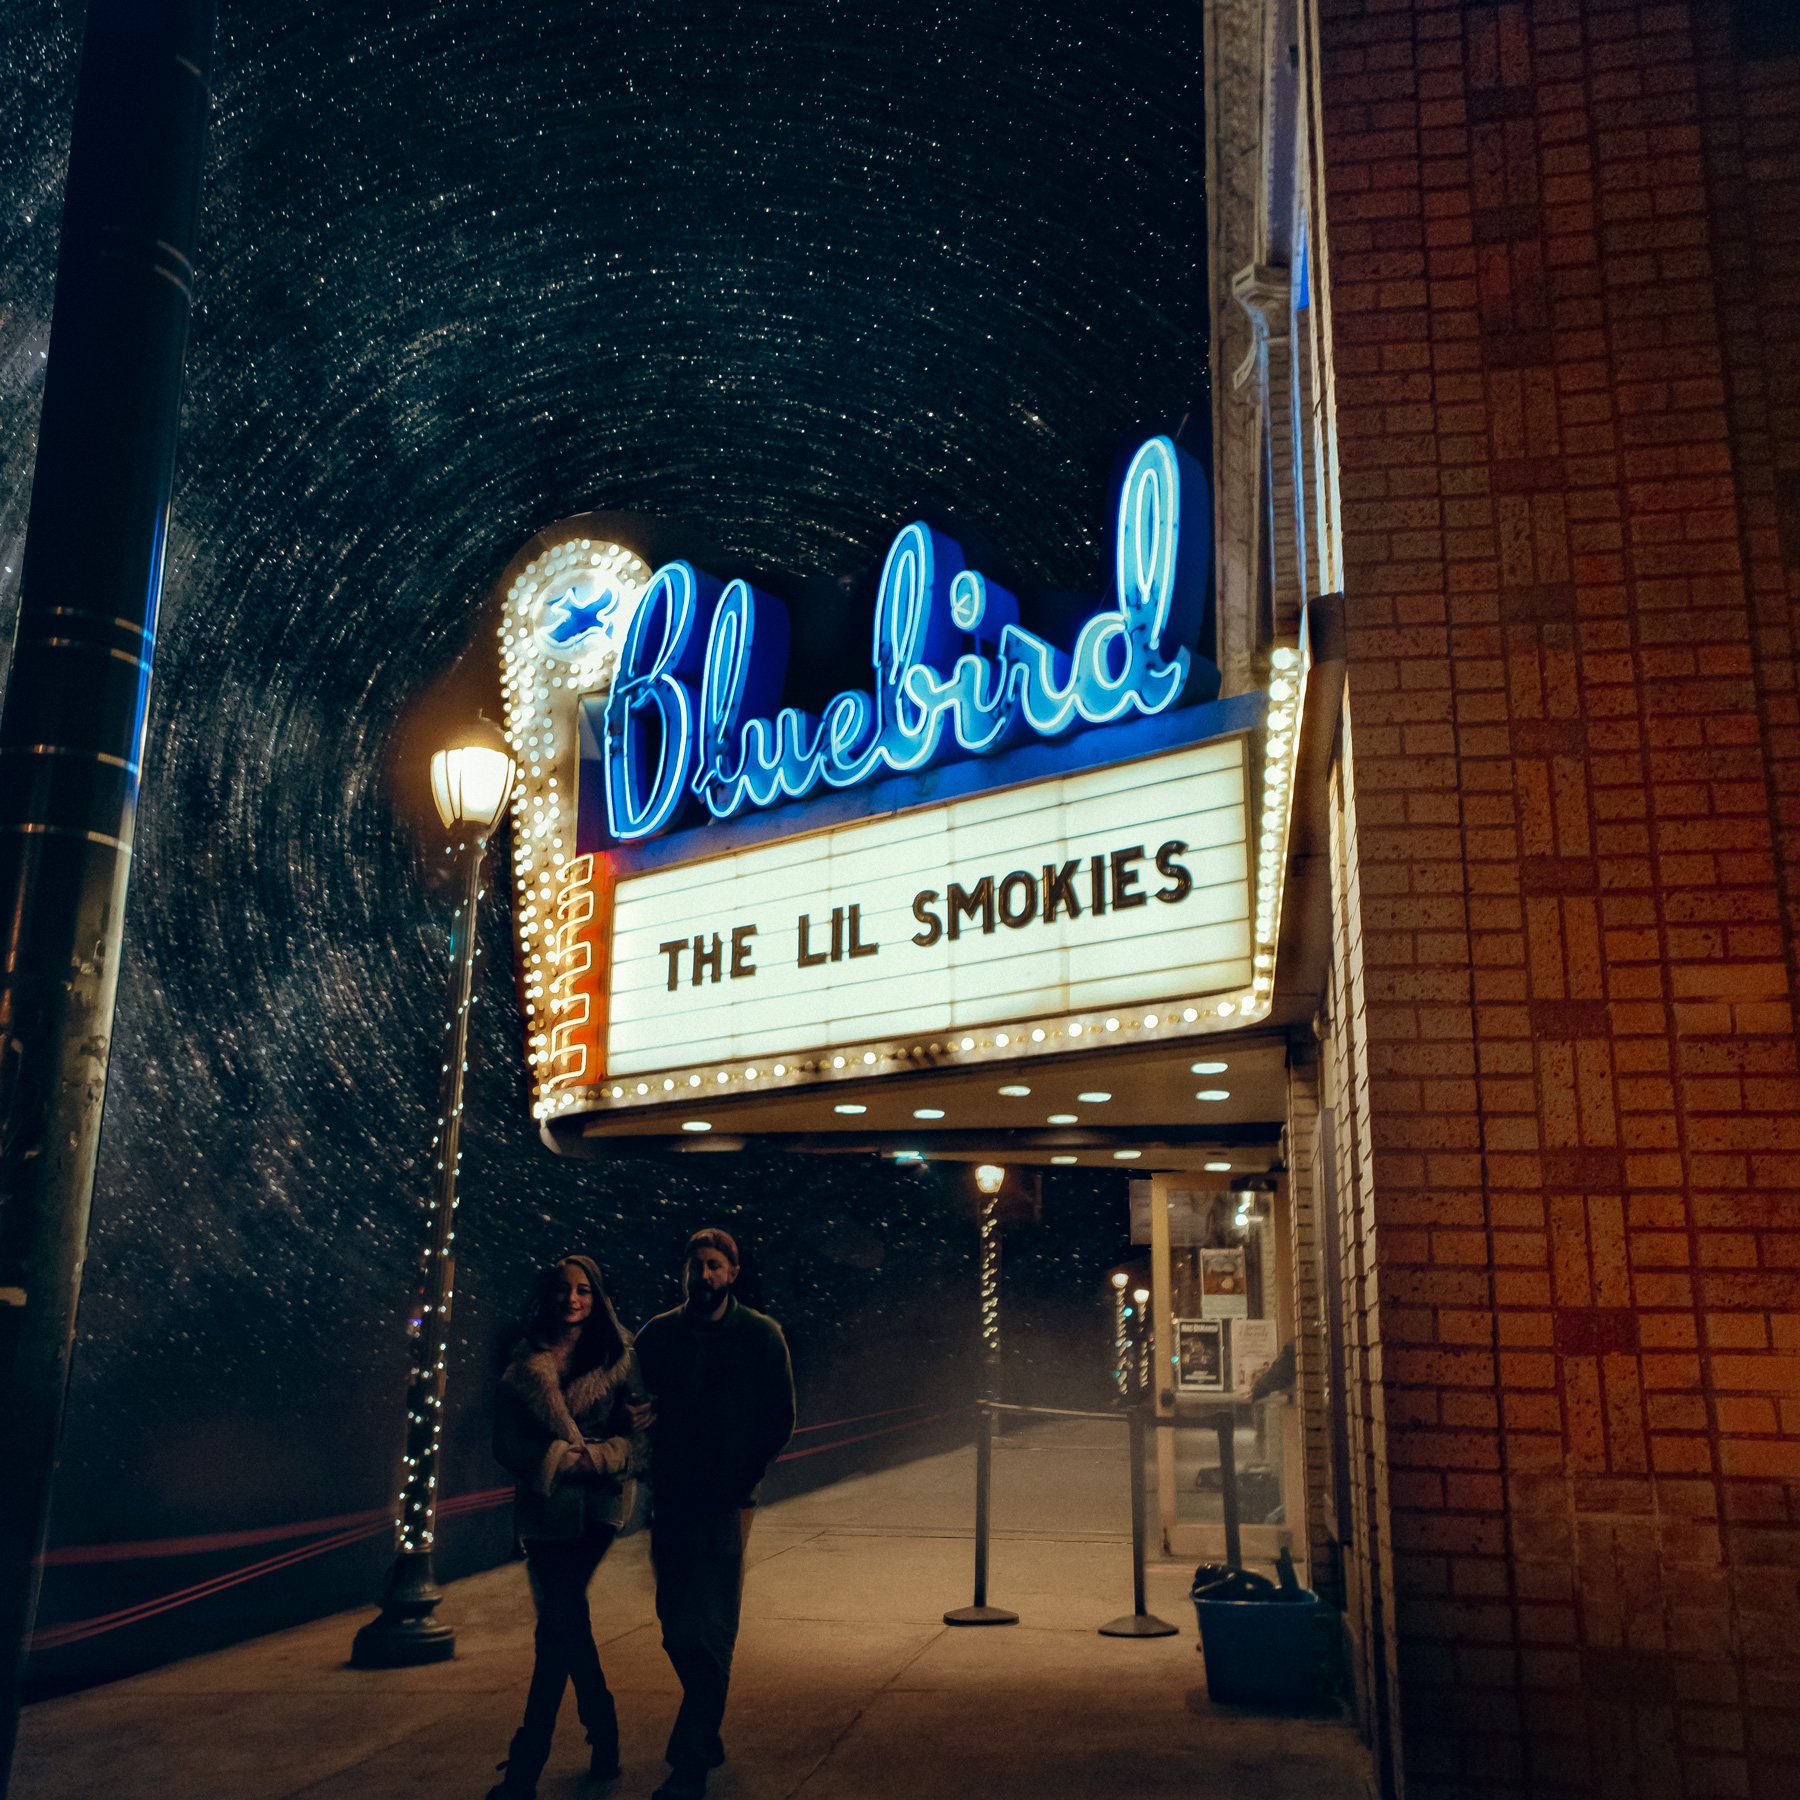 The Lil Smokies Announce New Album "Live at the Bluebird"